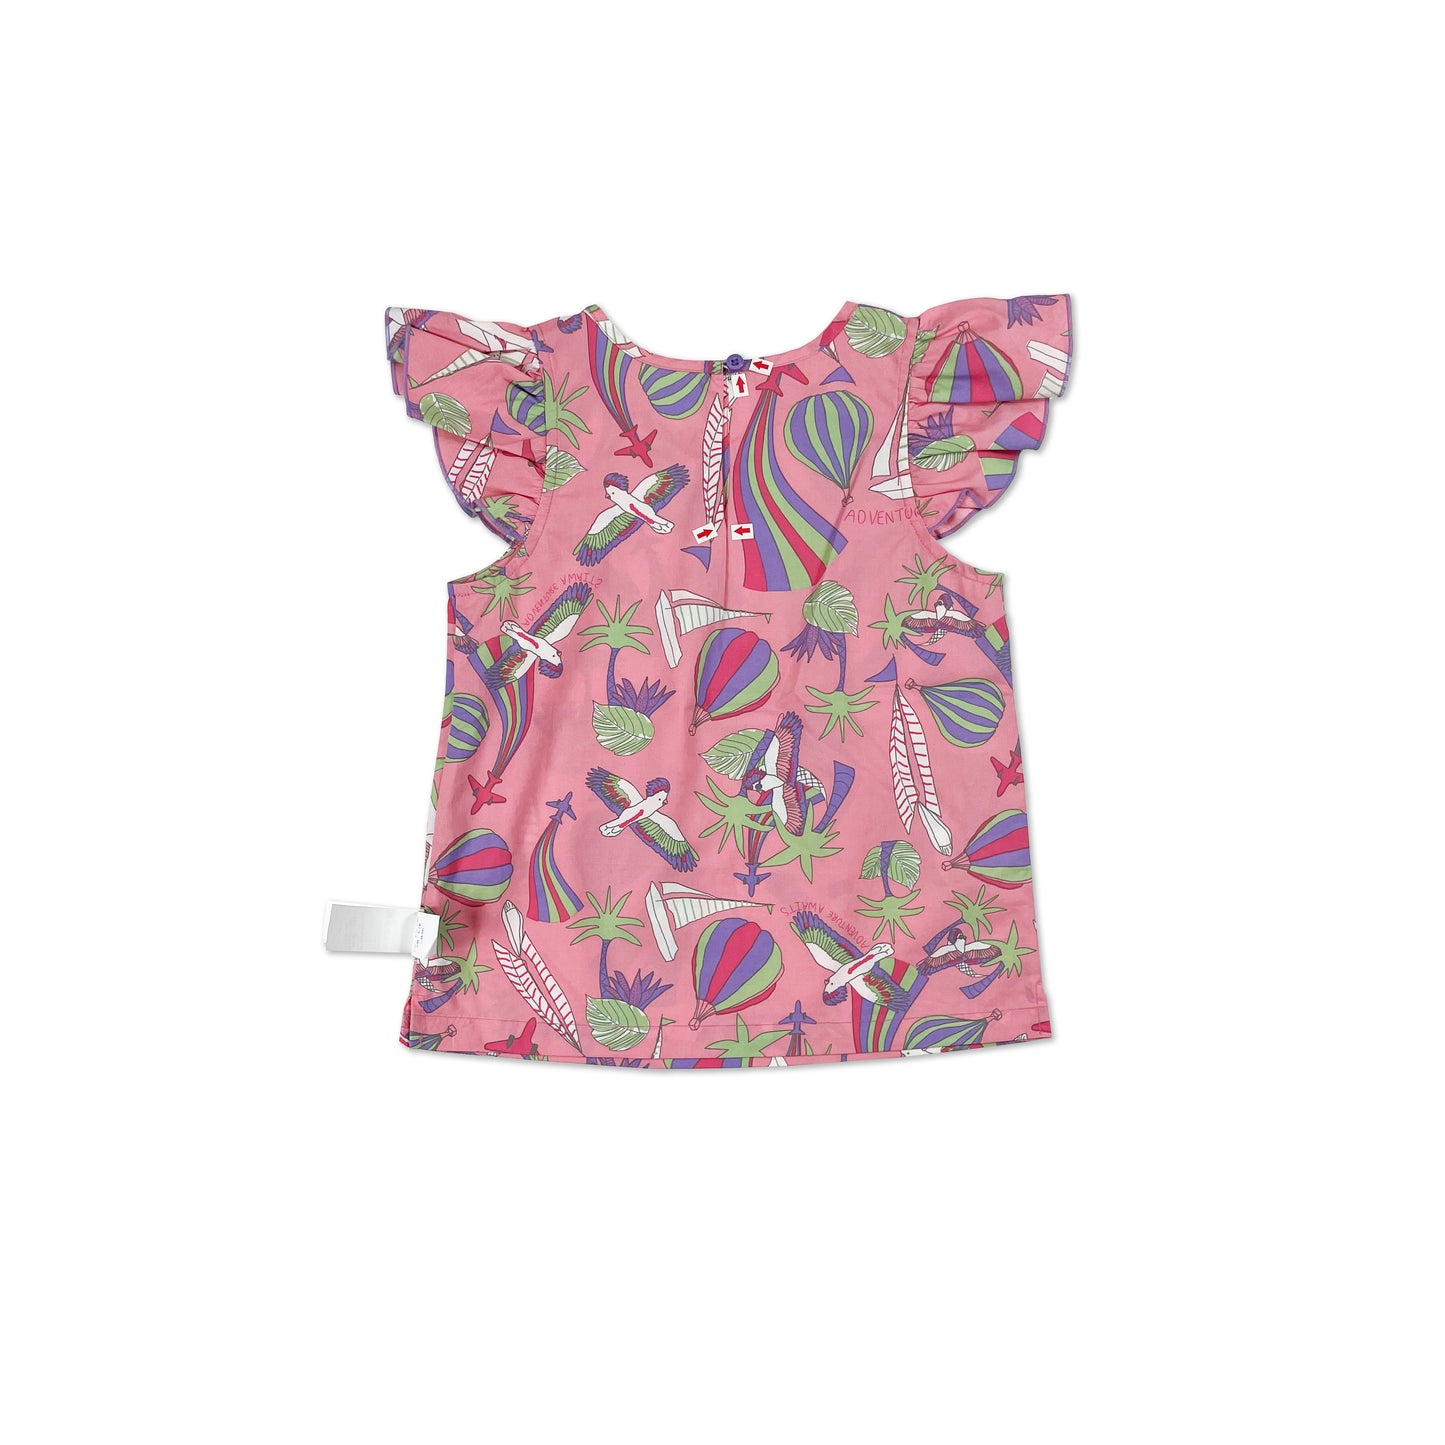 BABY/KIDS PARROT PRINT FRILL SLEEVE TOP